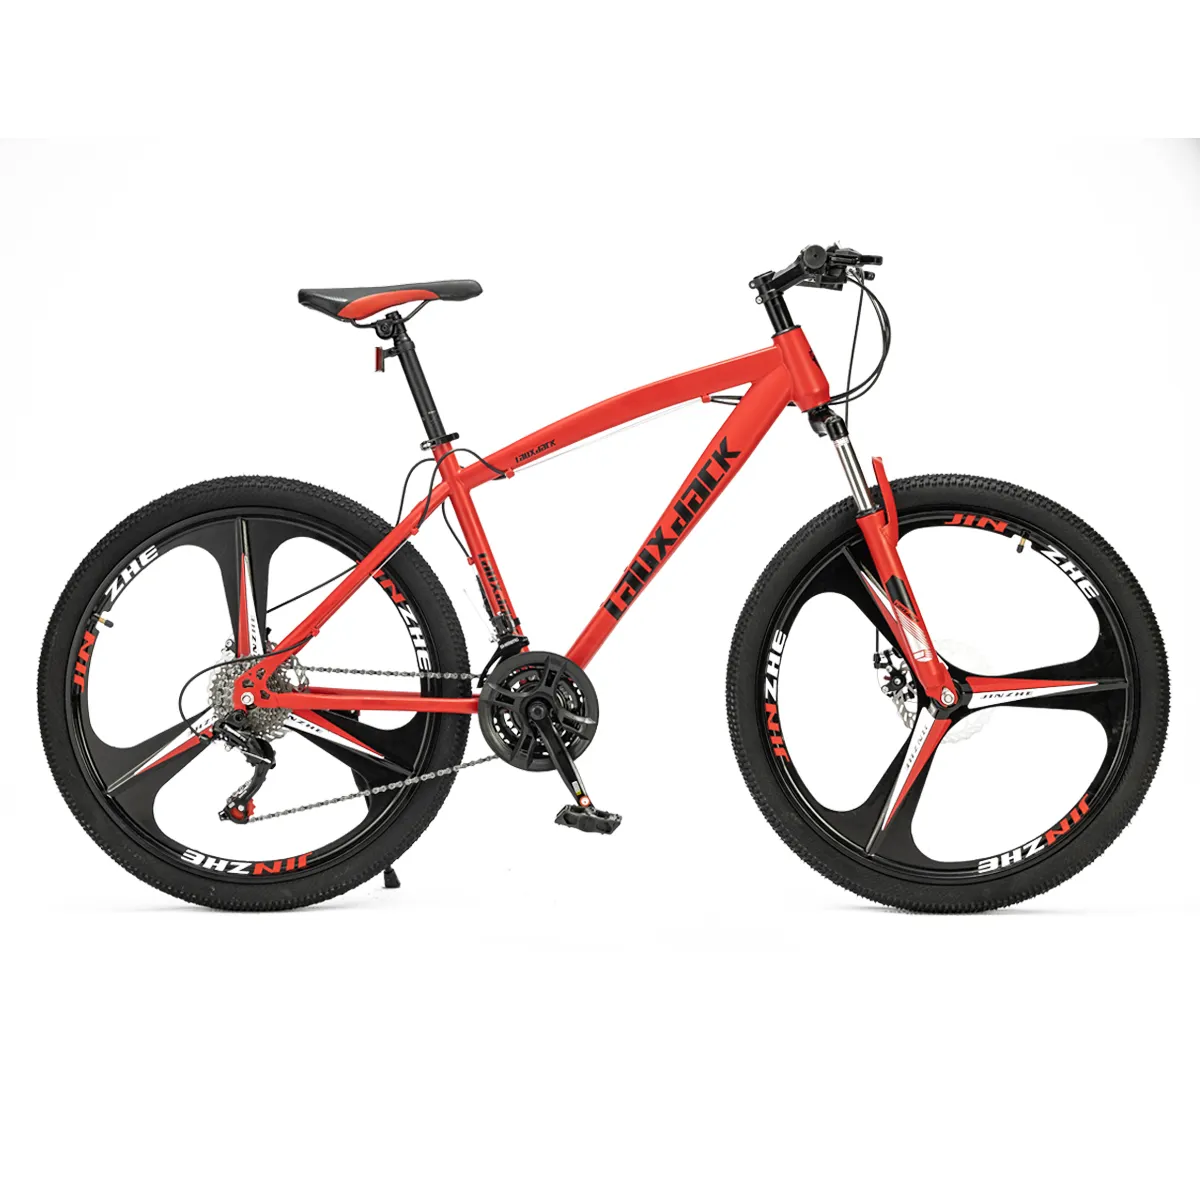 BIKE manufacture Offer Customized logo and packaging OEM ODM customized color/speed/brake system/frame style